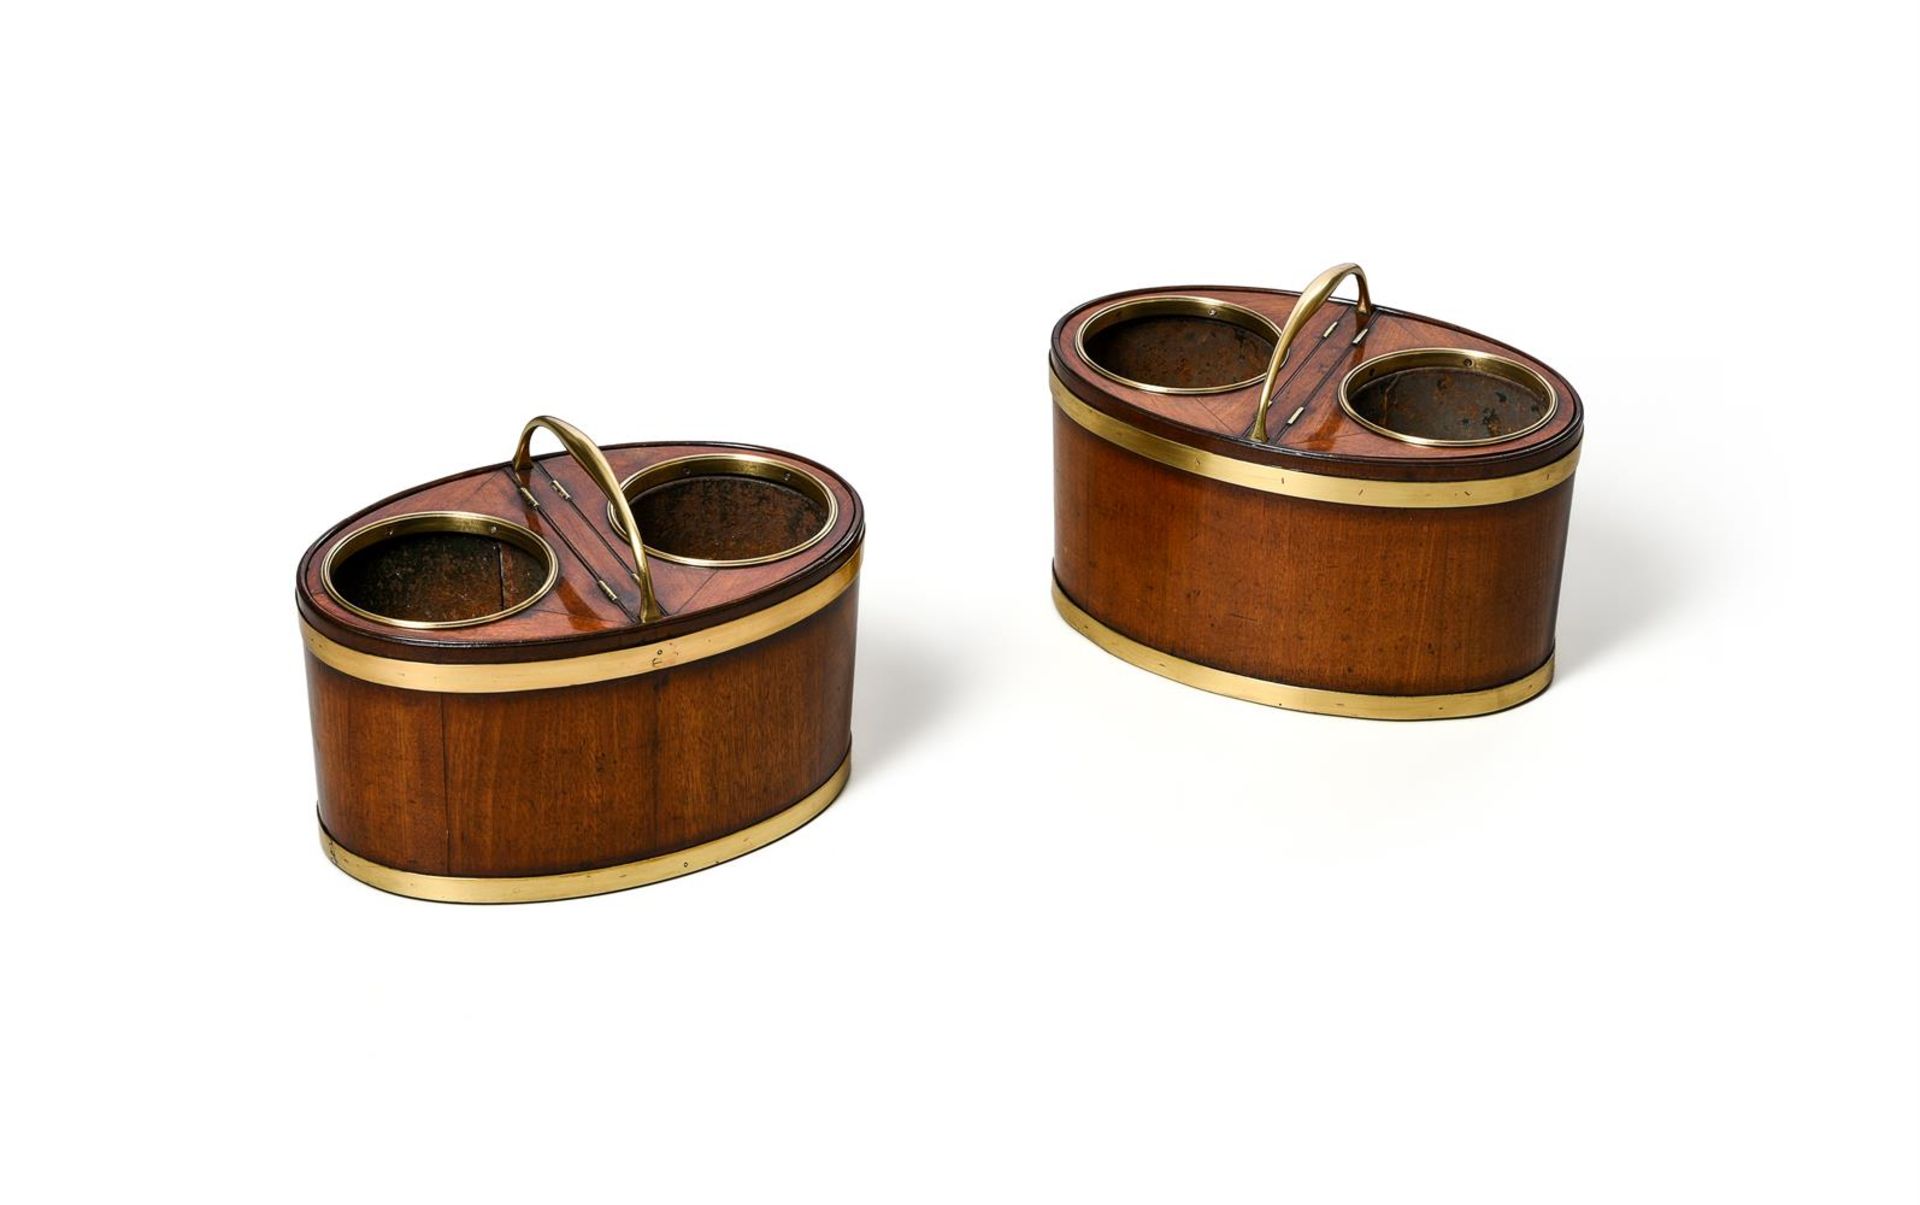 A RARE PAIR OF GEORGE III BRASS MOUNTED MAHOGANY TABLE TOP OVAL WINE COOLERS, CIRCA 1790